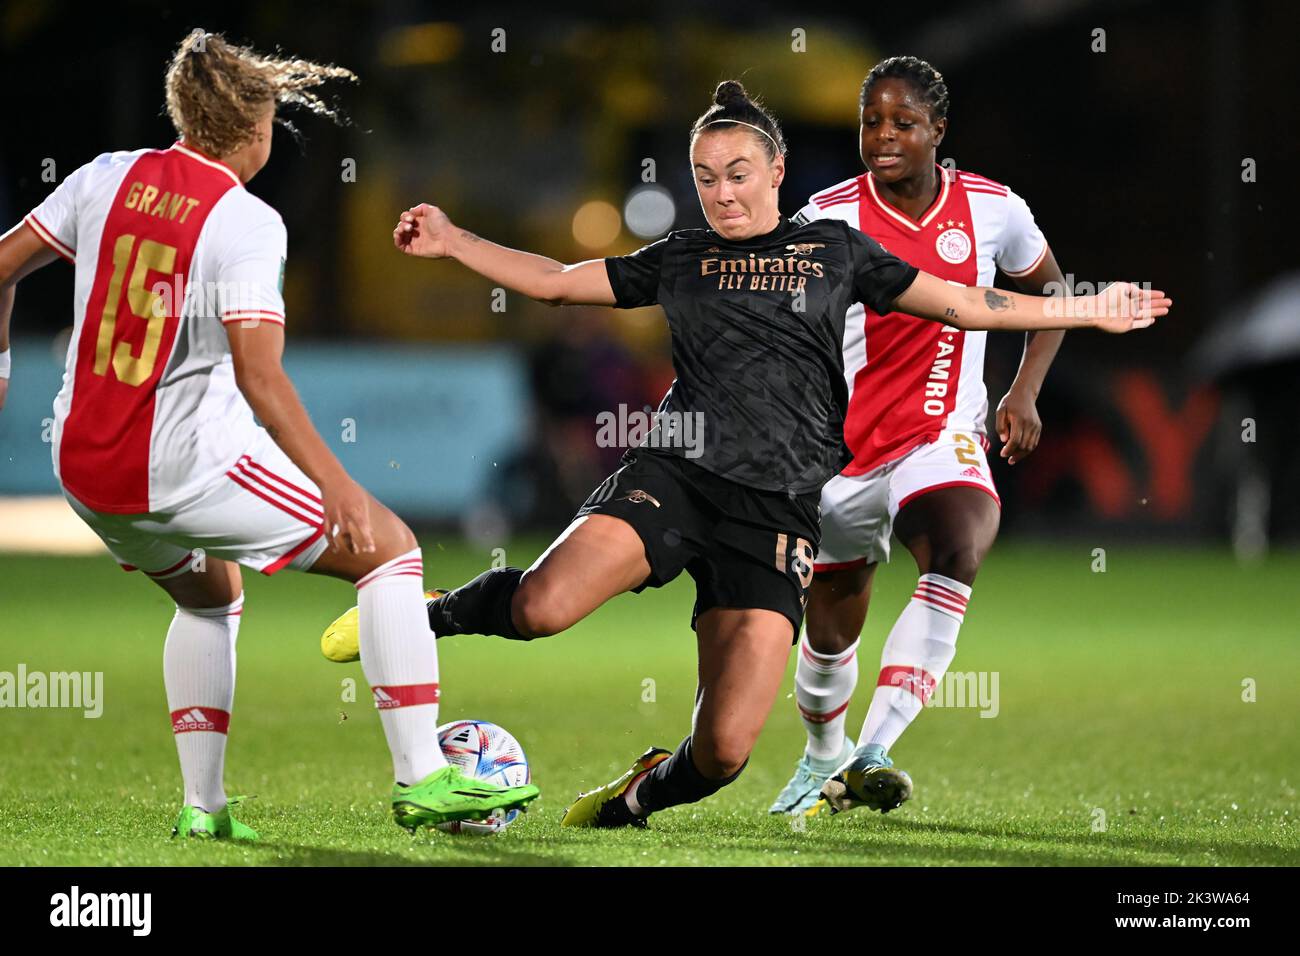 AMSTERDAM - (lr) Chasity Grant of Ajax women, Caitlin Foord of Arsenal WFC, Liza van der Most of Ajax women during the UEFA Champions League women's match between Ajax Amsterdam and Arsenal FC at De Toekomst sports complex on September 28, 2022 in Amsterdam, Netherlands . ANP GERRIT VAN COLOGNE Stock Photo